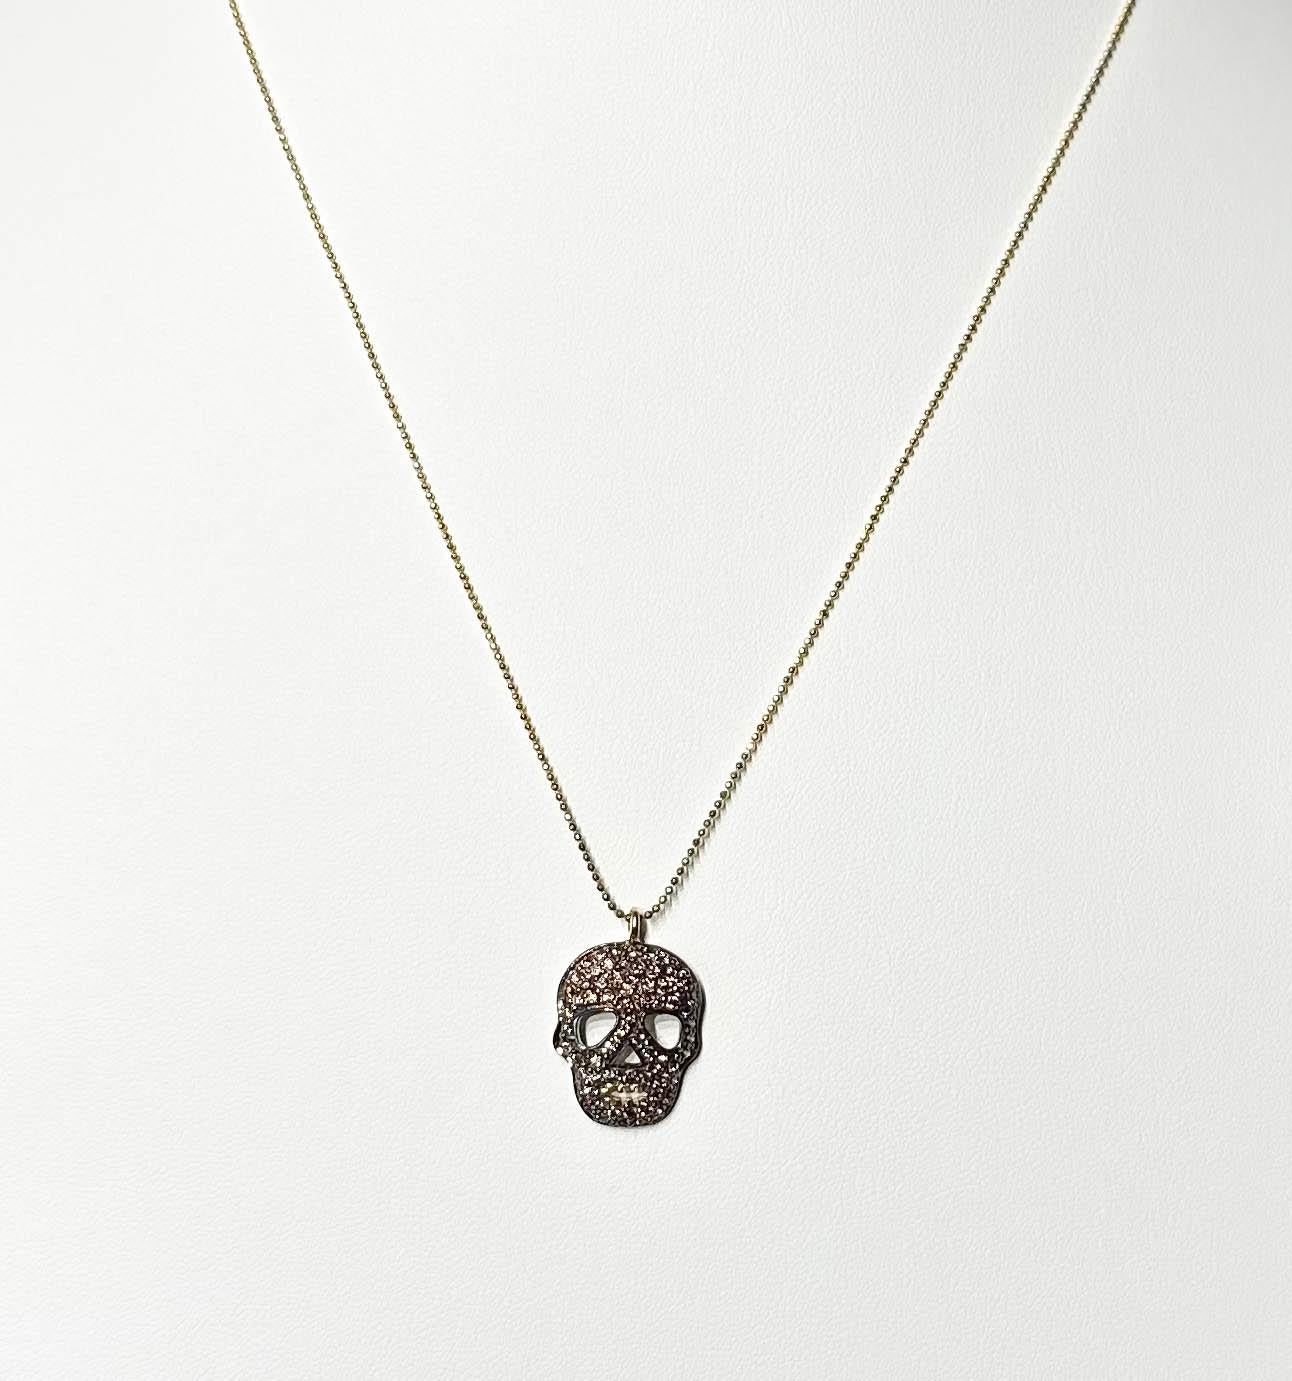 A Skull Pendant set with Brown Zircons in Blackened Silver For Sale 3